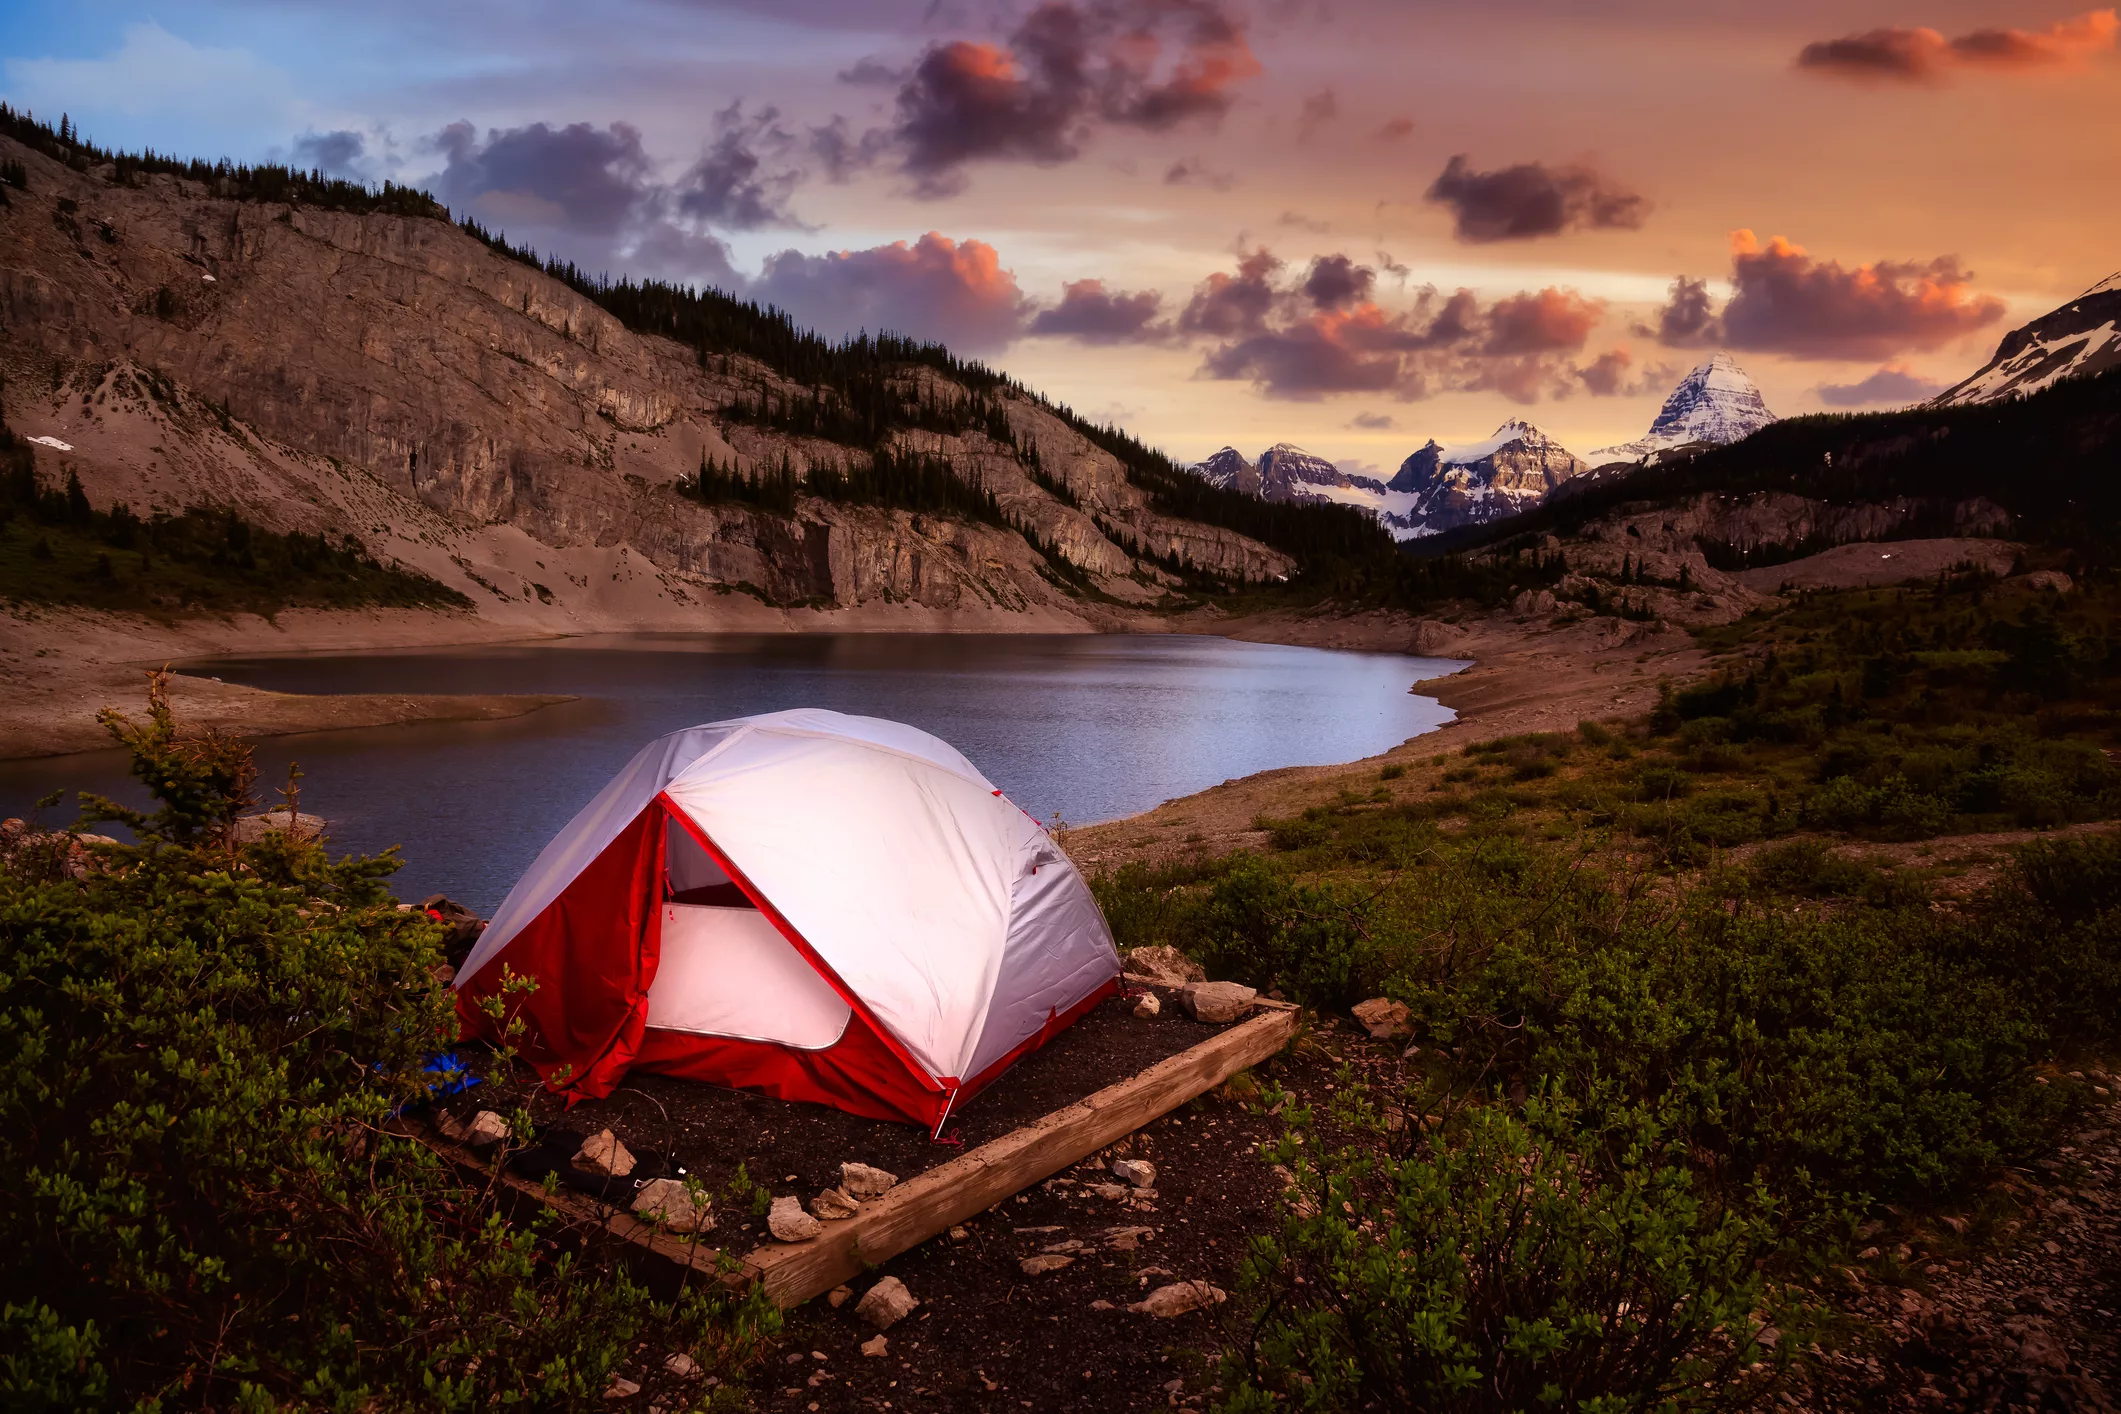 Opinion: Campsites in Canada Are Way Too Difficult to Book